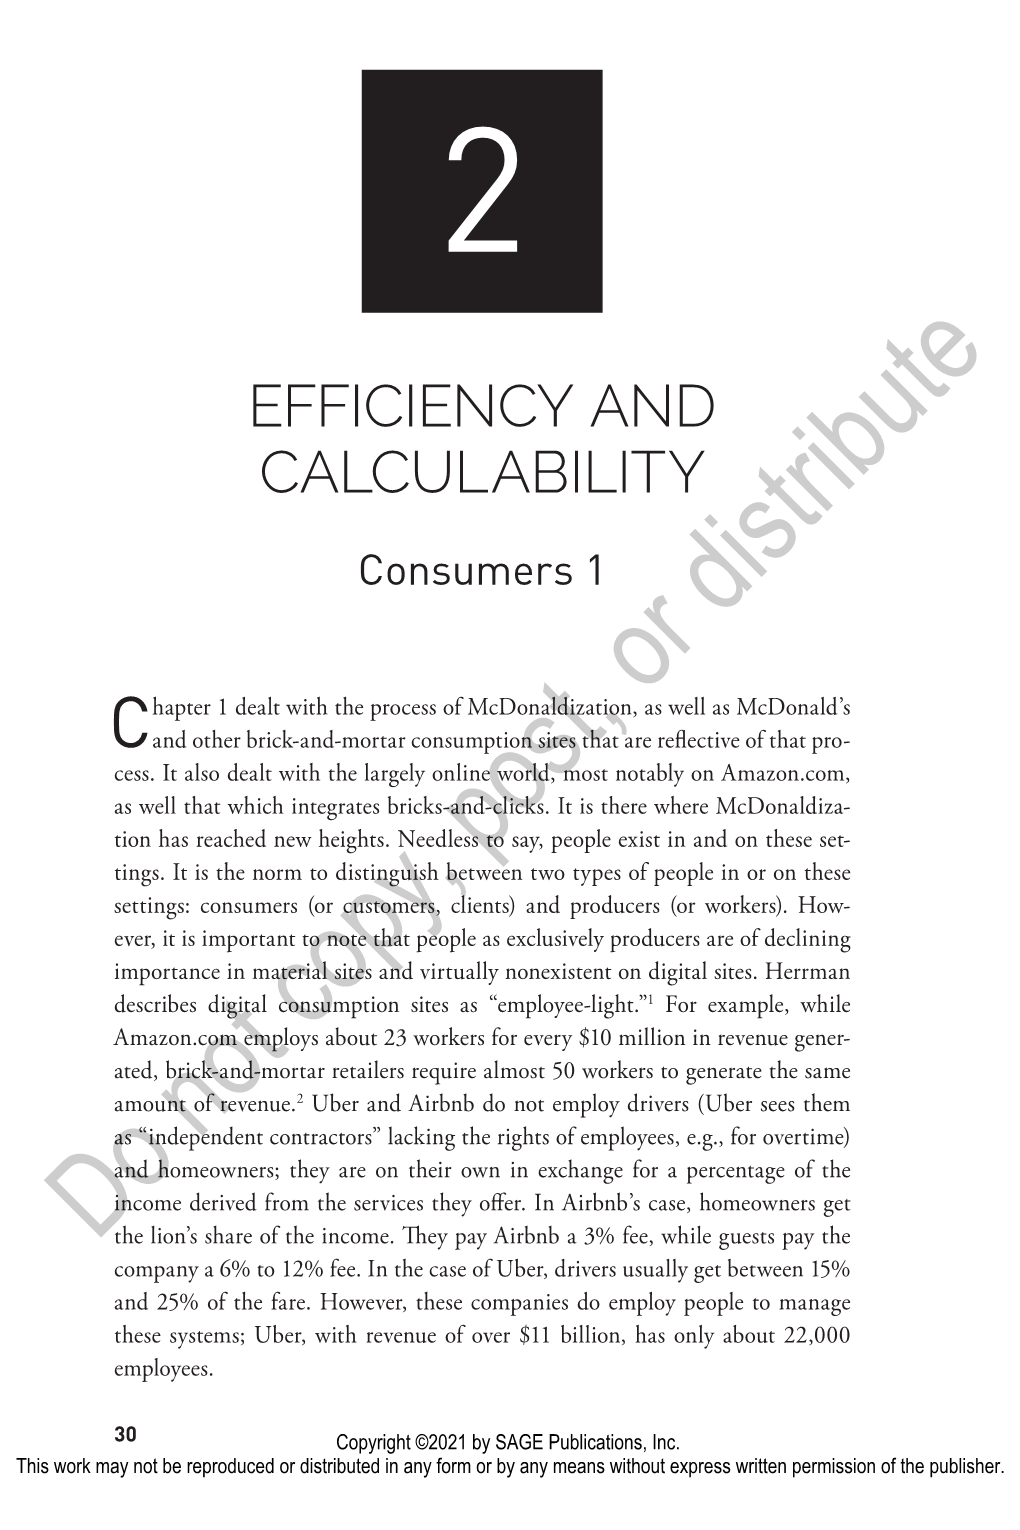 Chapter 2: Efficiency and Calculability: Consumers 1